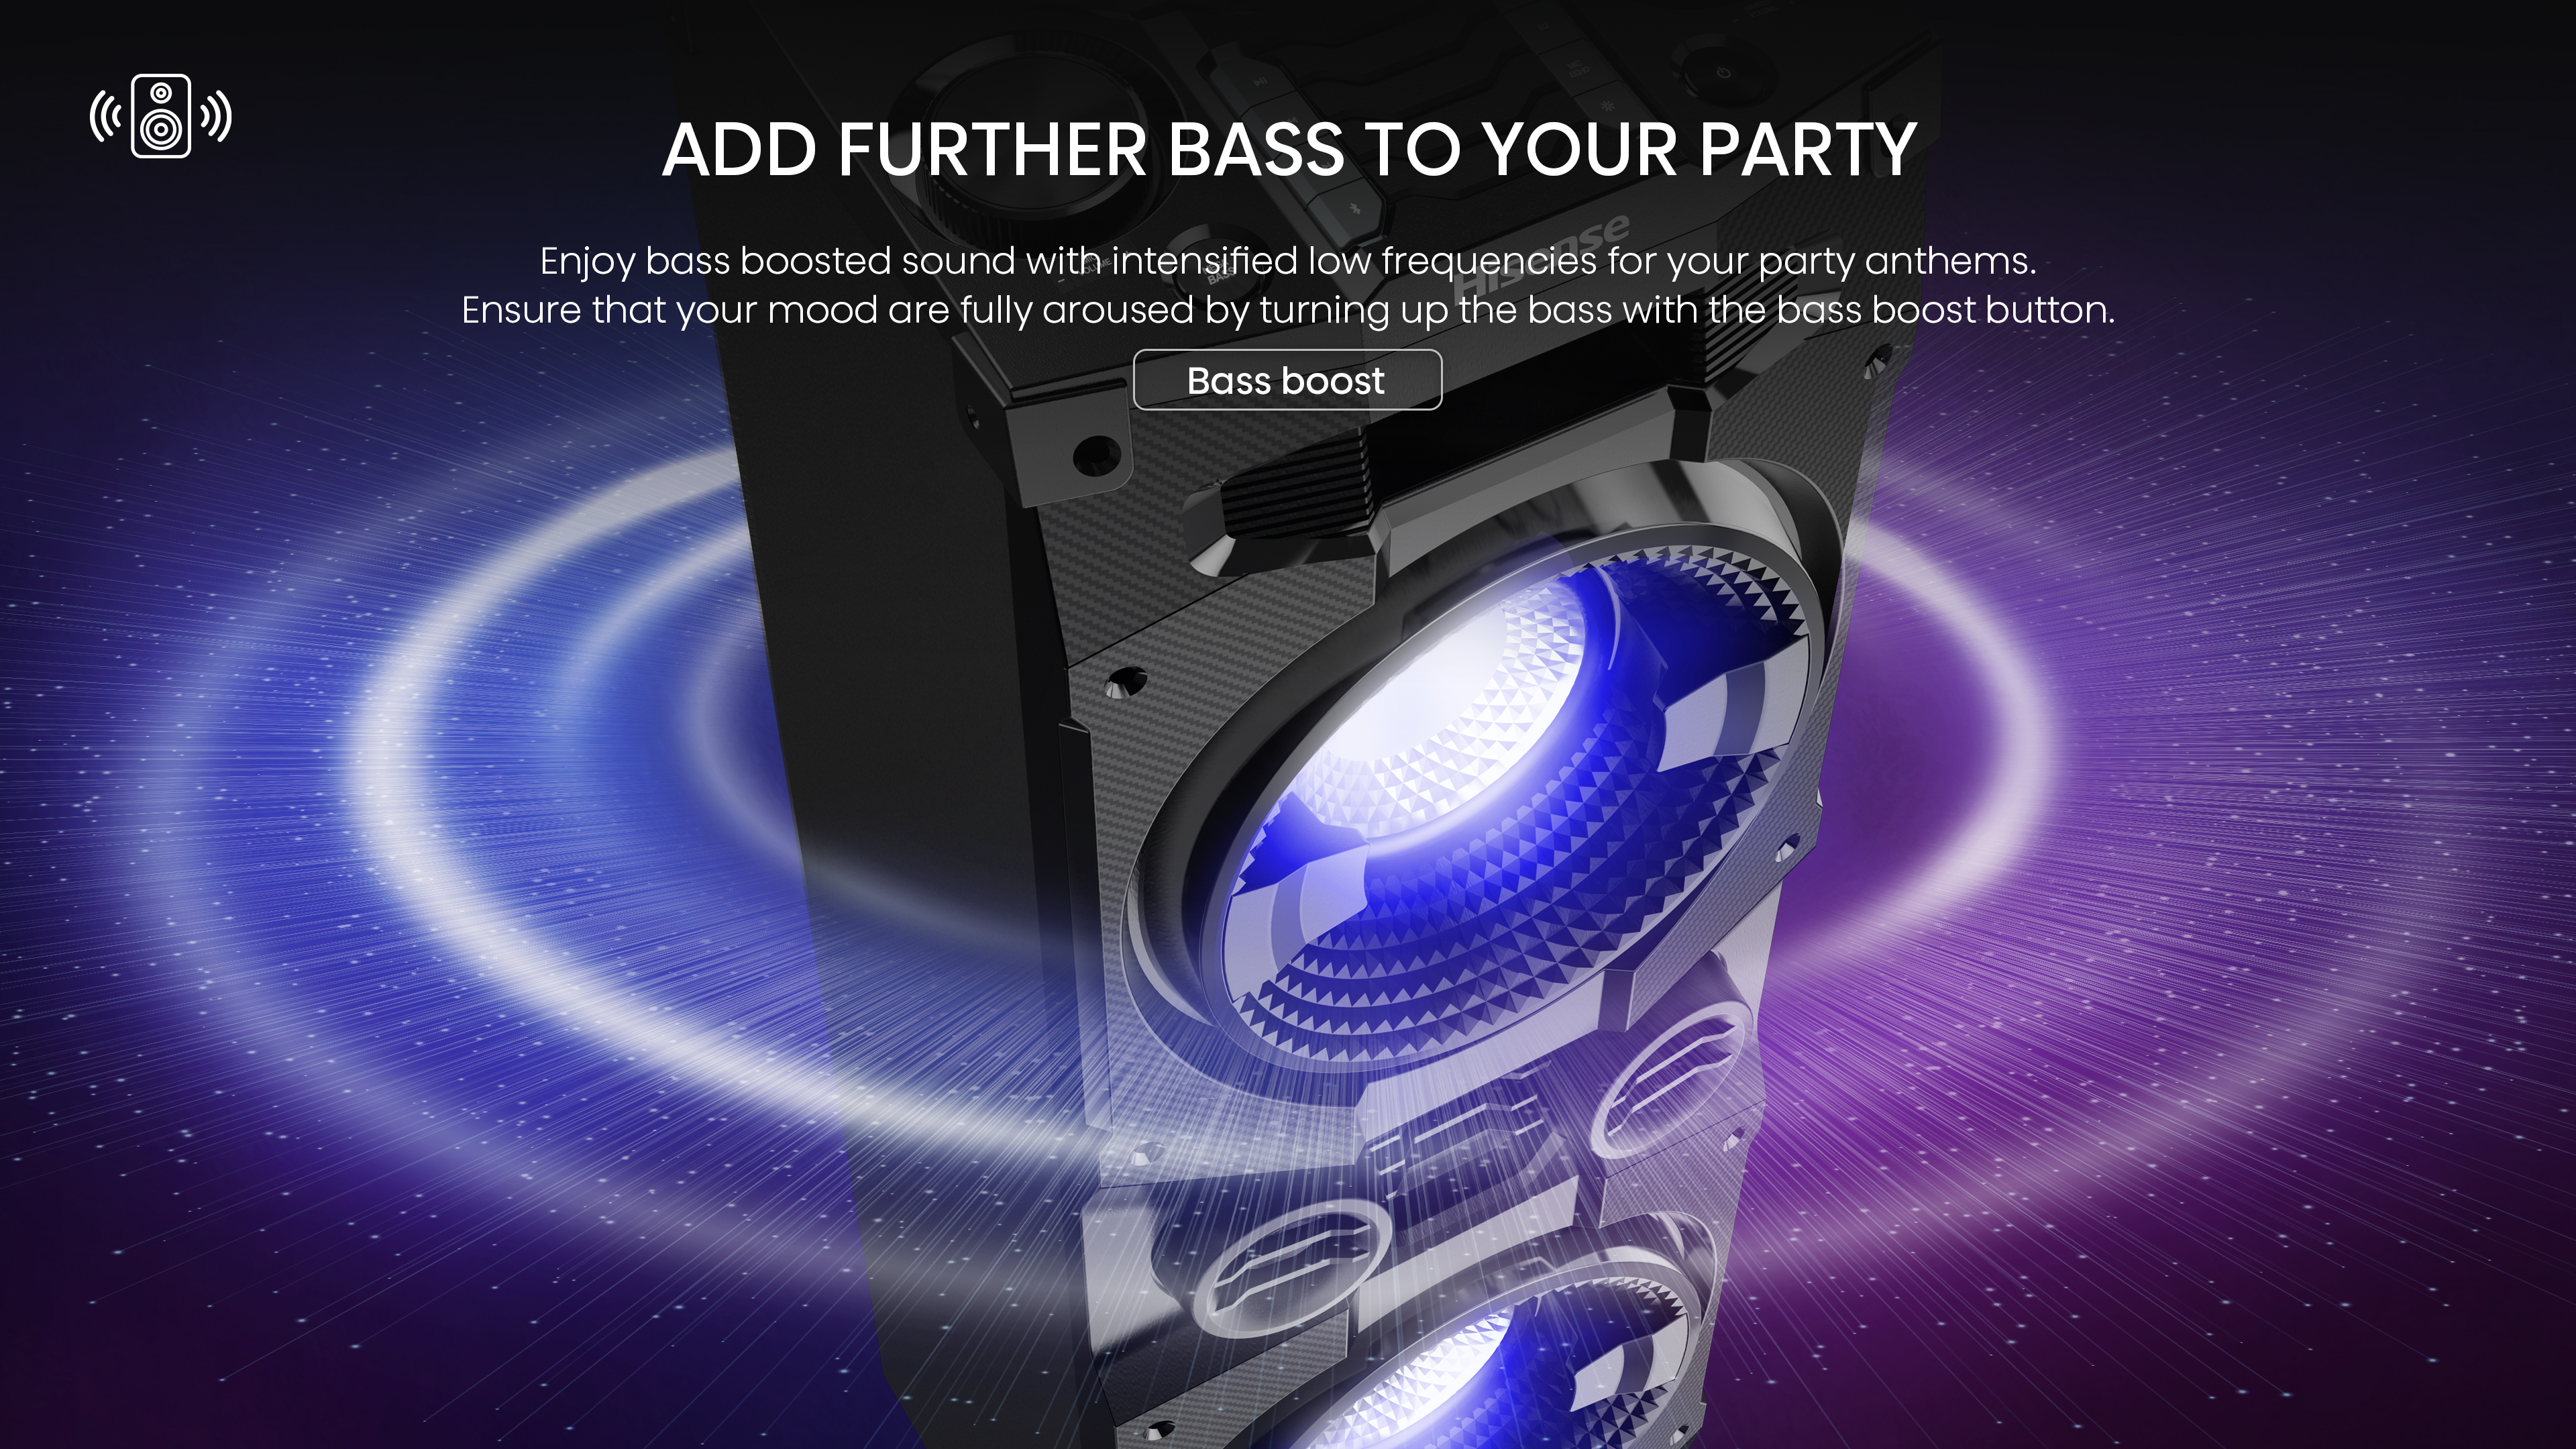 4.Add further bass to your party